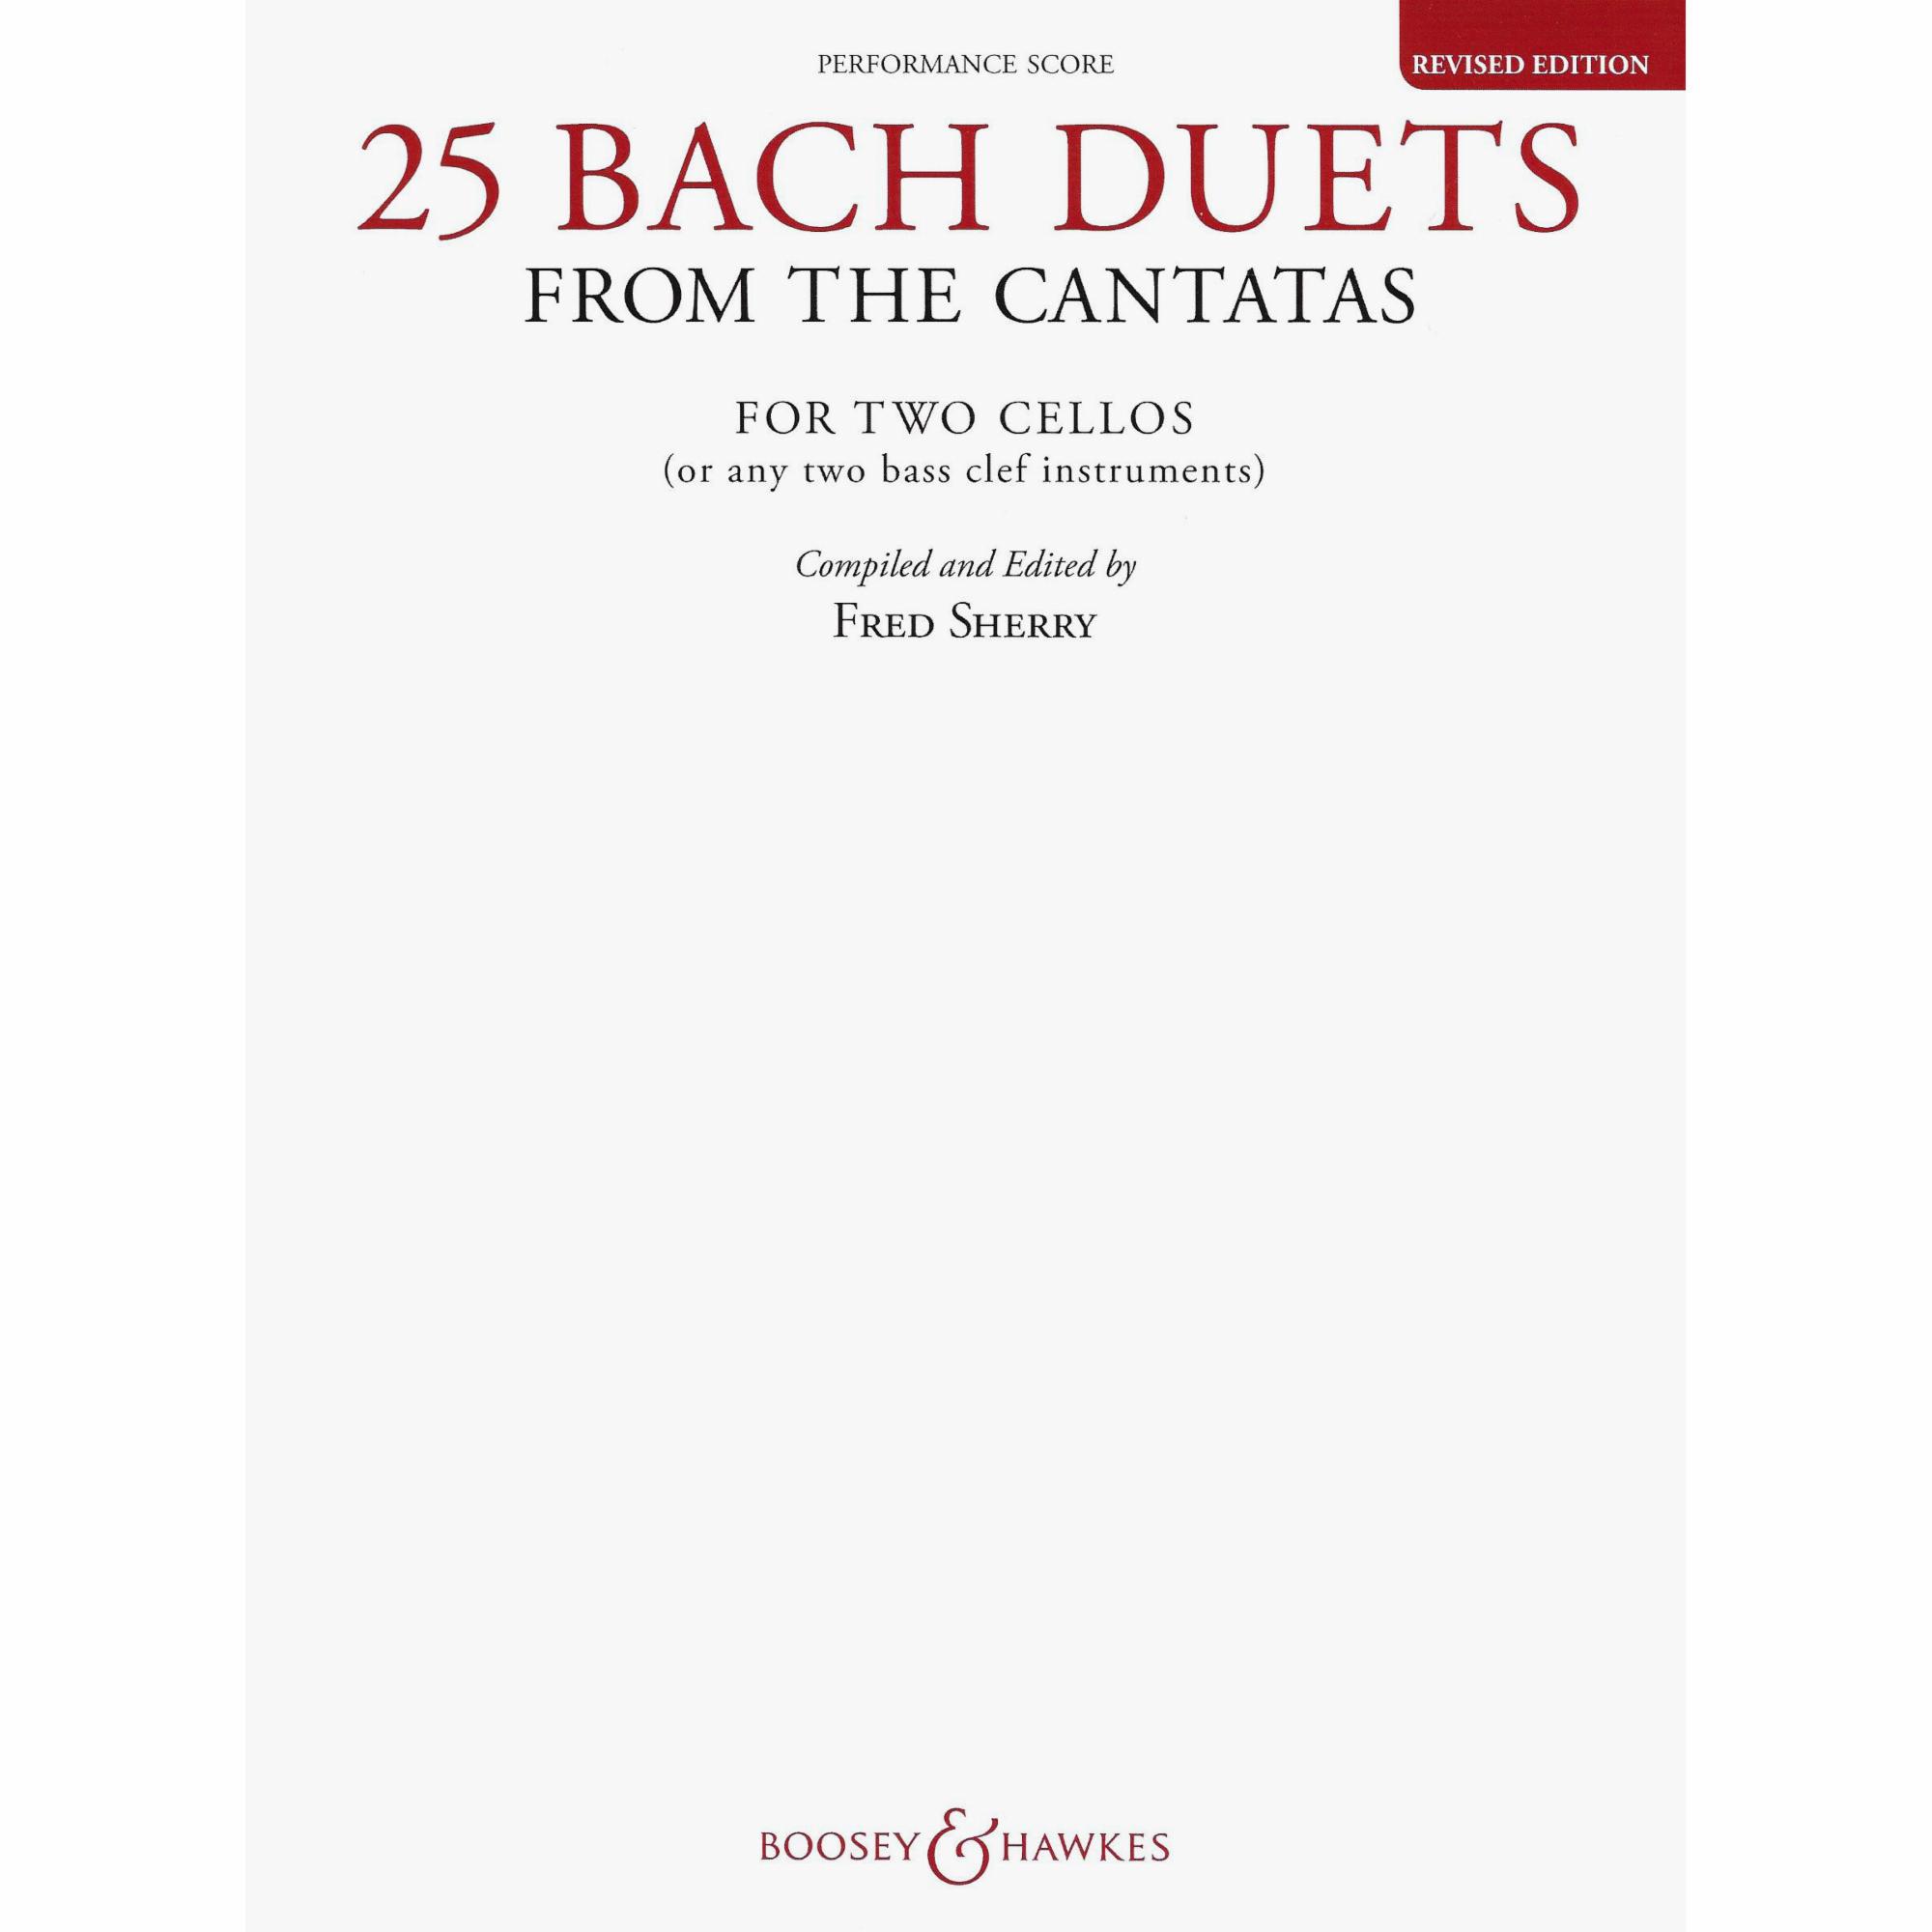 25 Bach Duets for Two Cellos